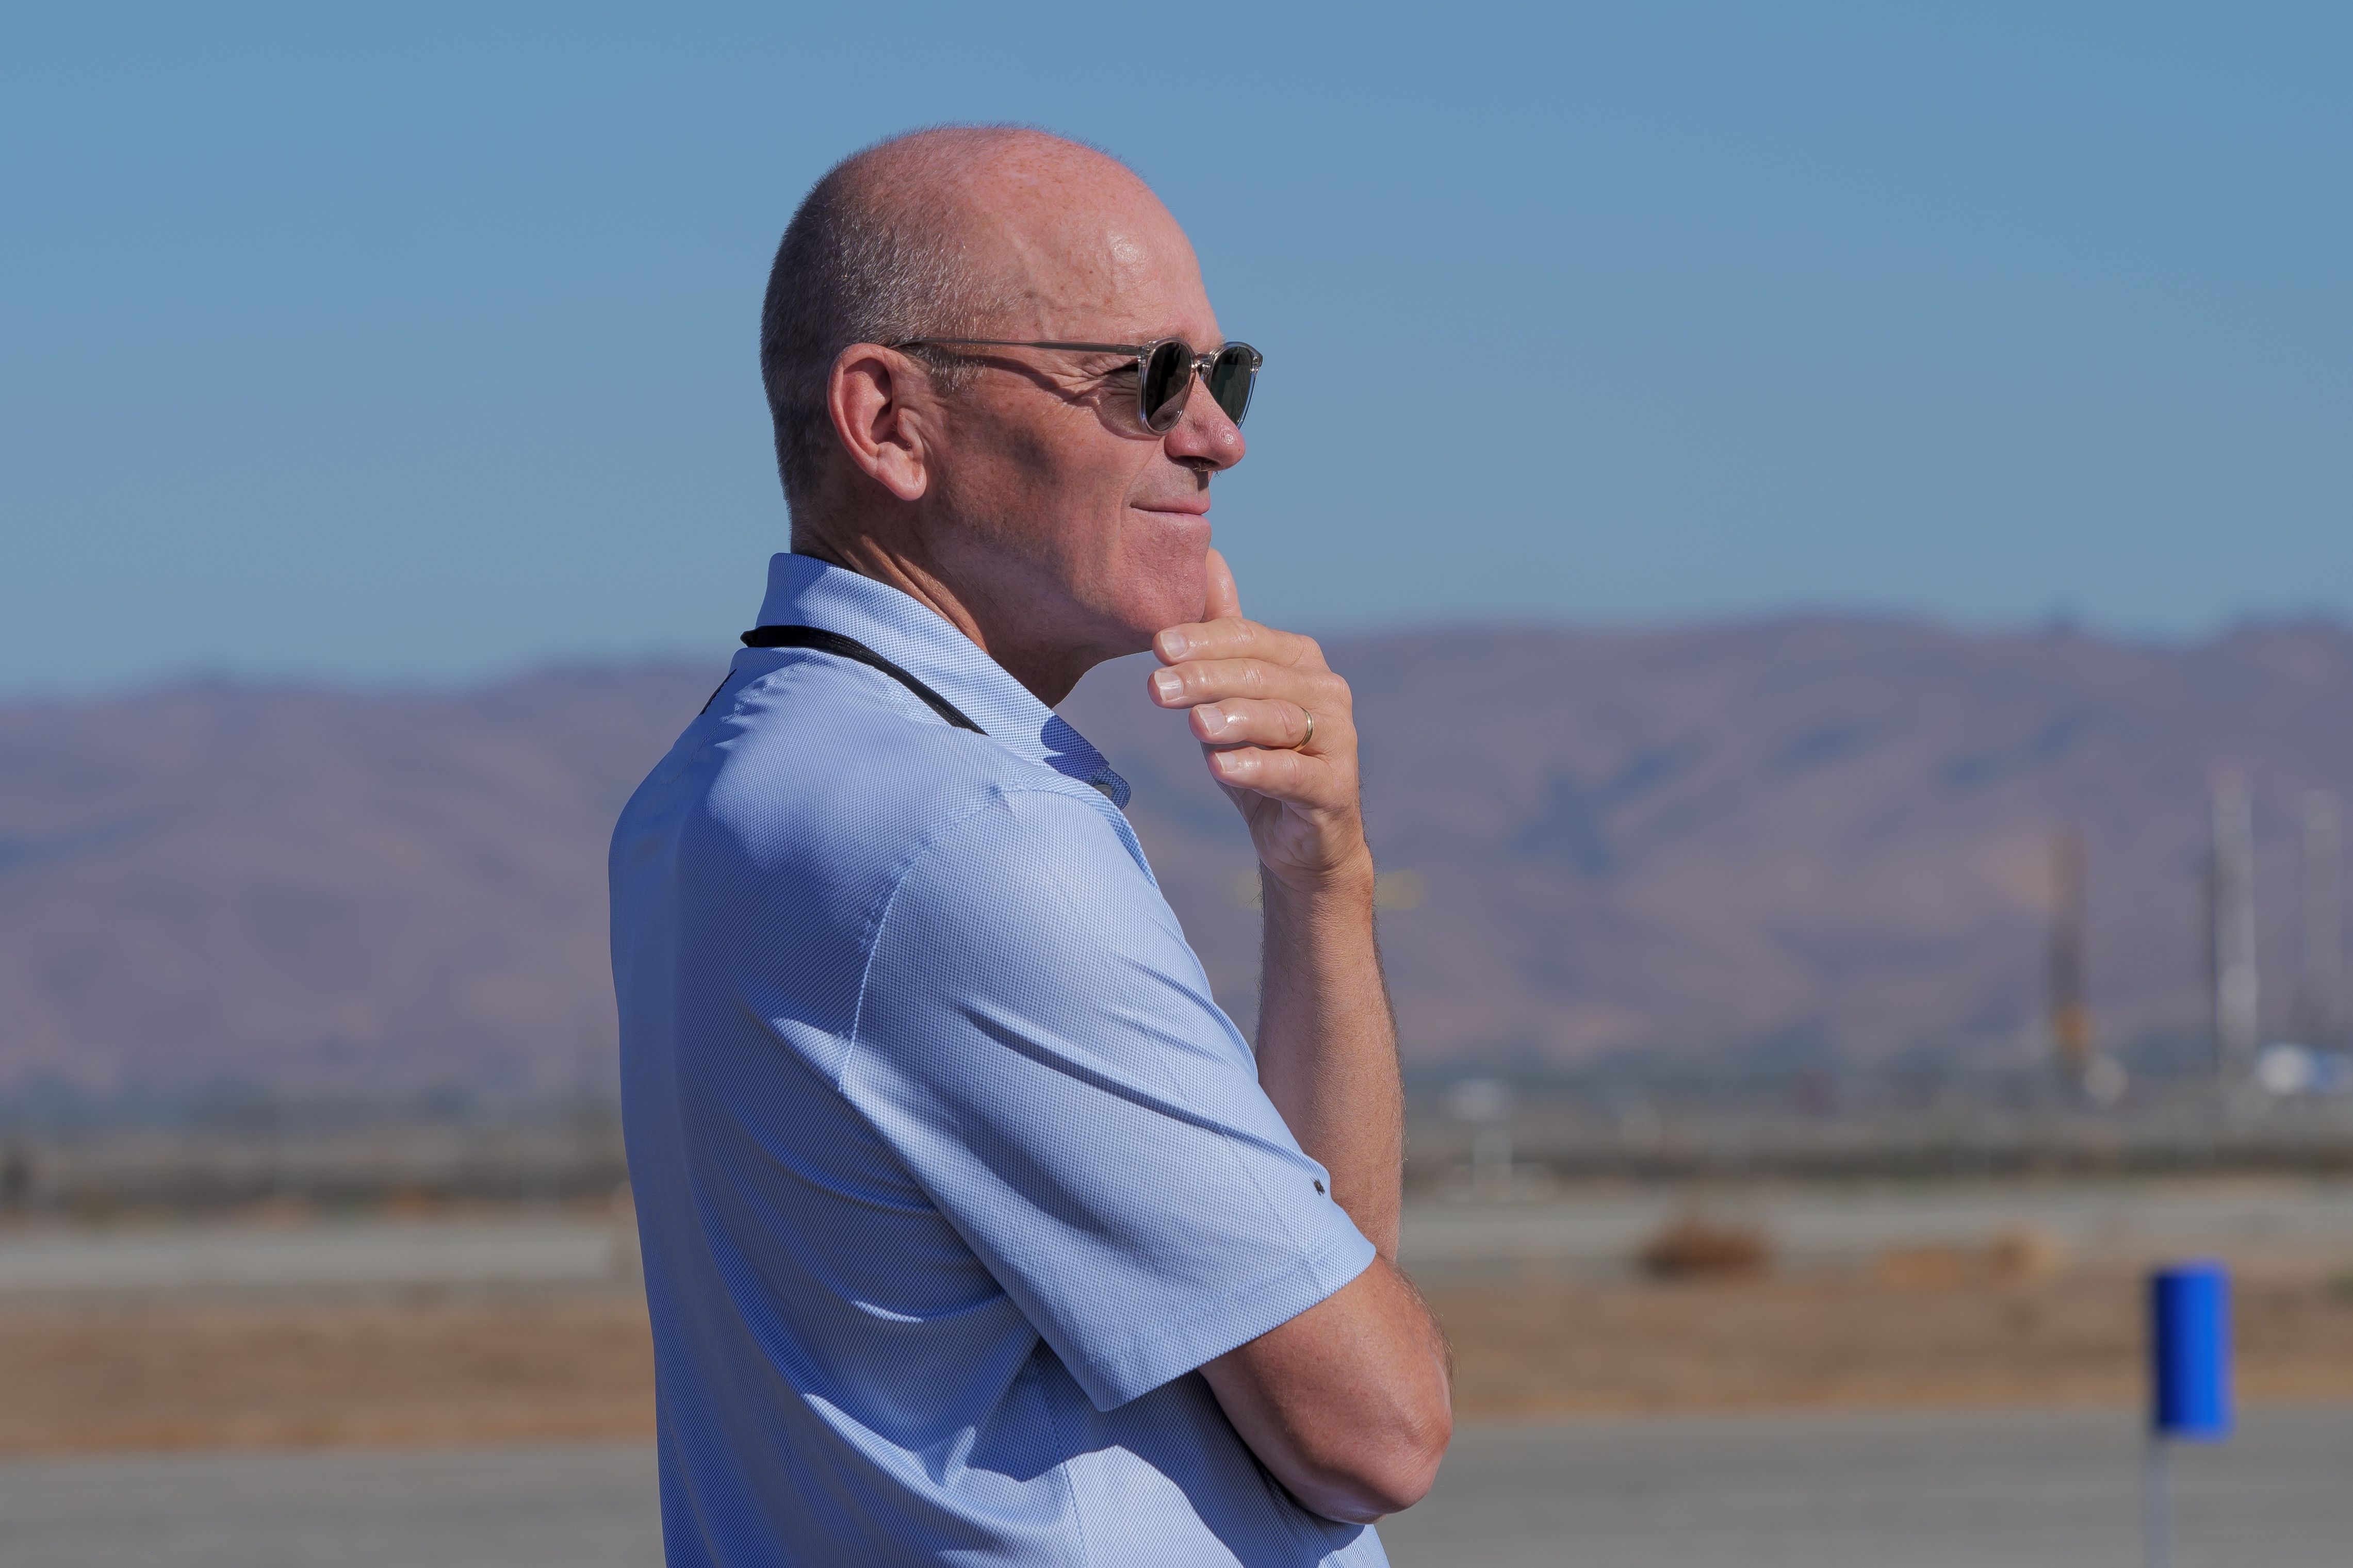 Hollister, California, USA - September 22, 2022. Boeing CEO Dave Calhoun at an event at a California airport on in 2022. Calhoun will be stepping down as CEO at the end of 2024.